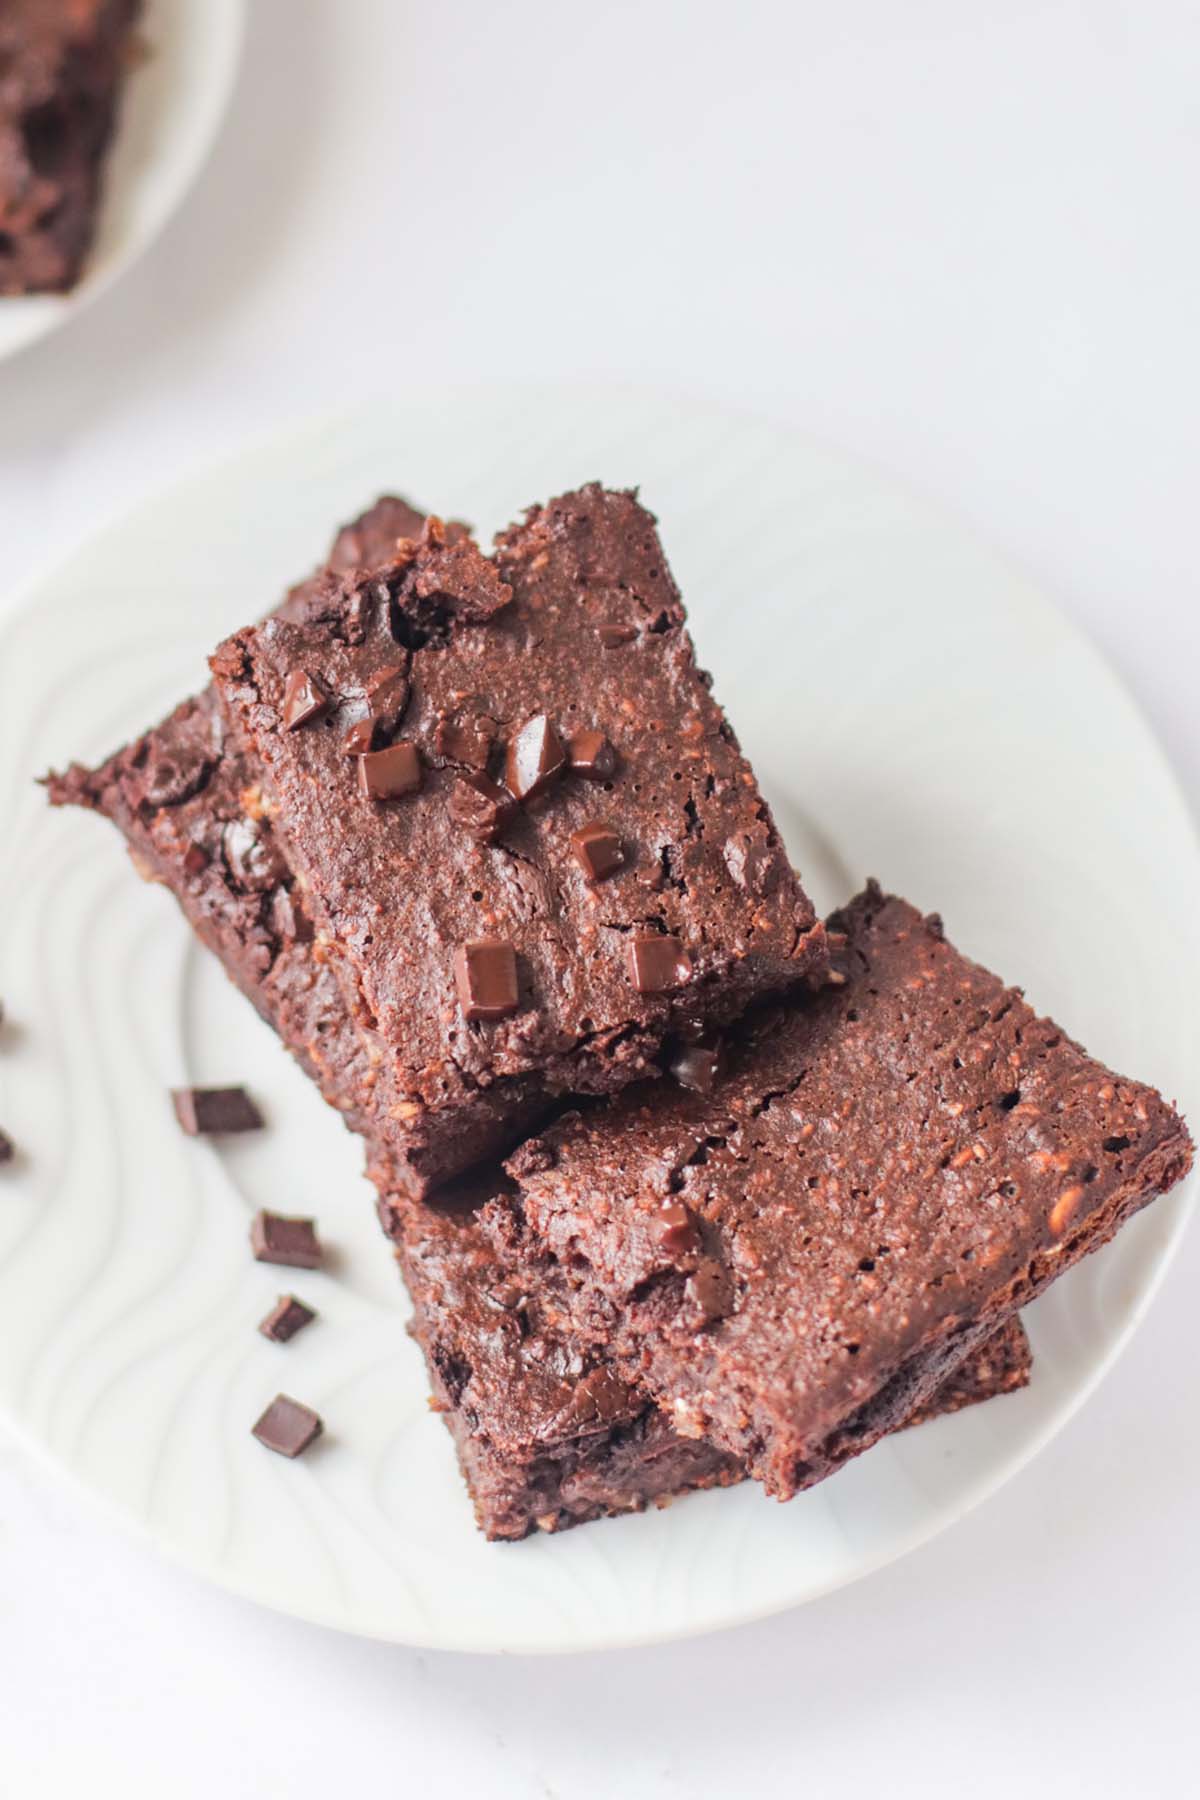 Brownies on a plate with chocolate chunks sprinkled over them.